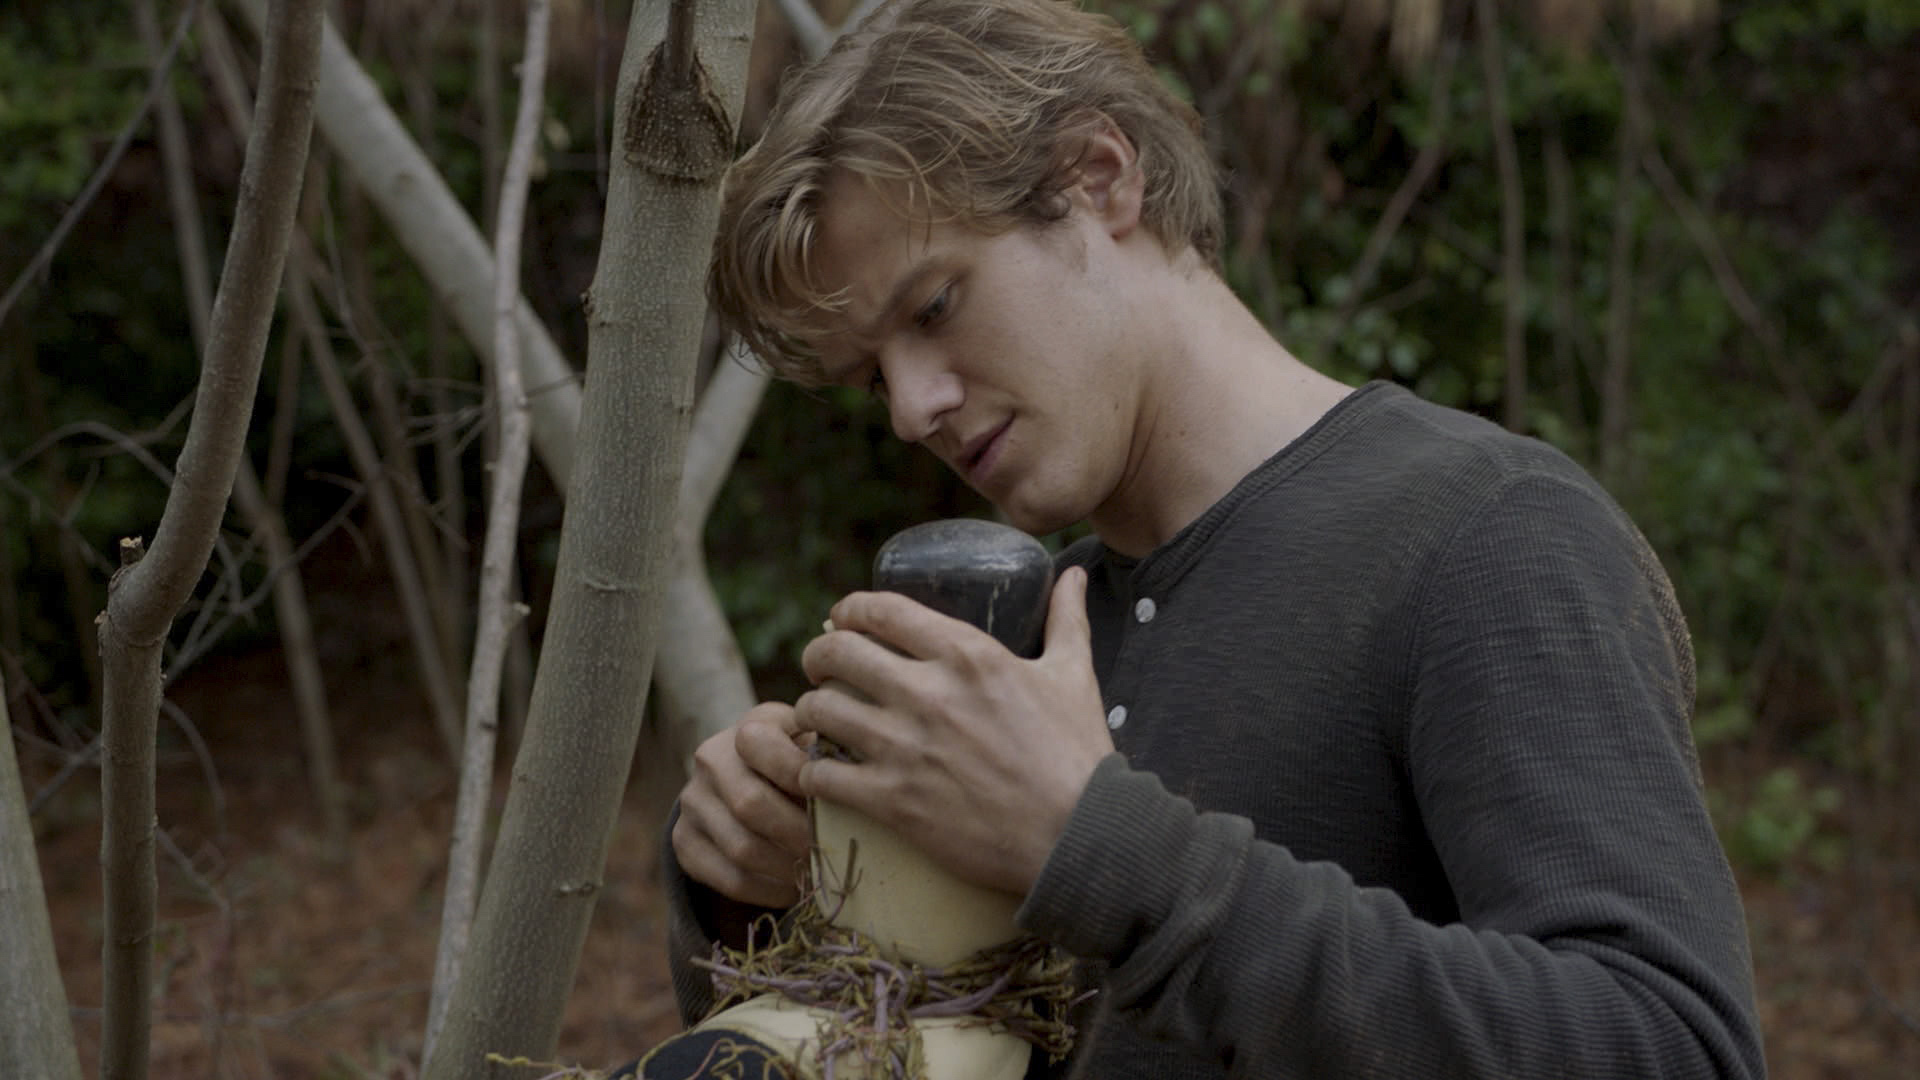 MacGyver uses objects around him to create a weapon.